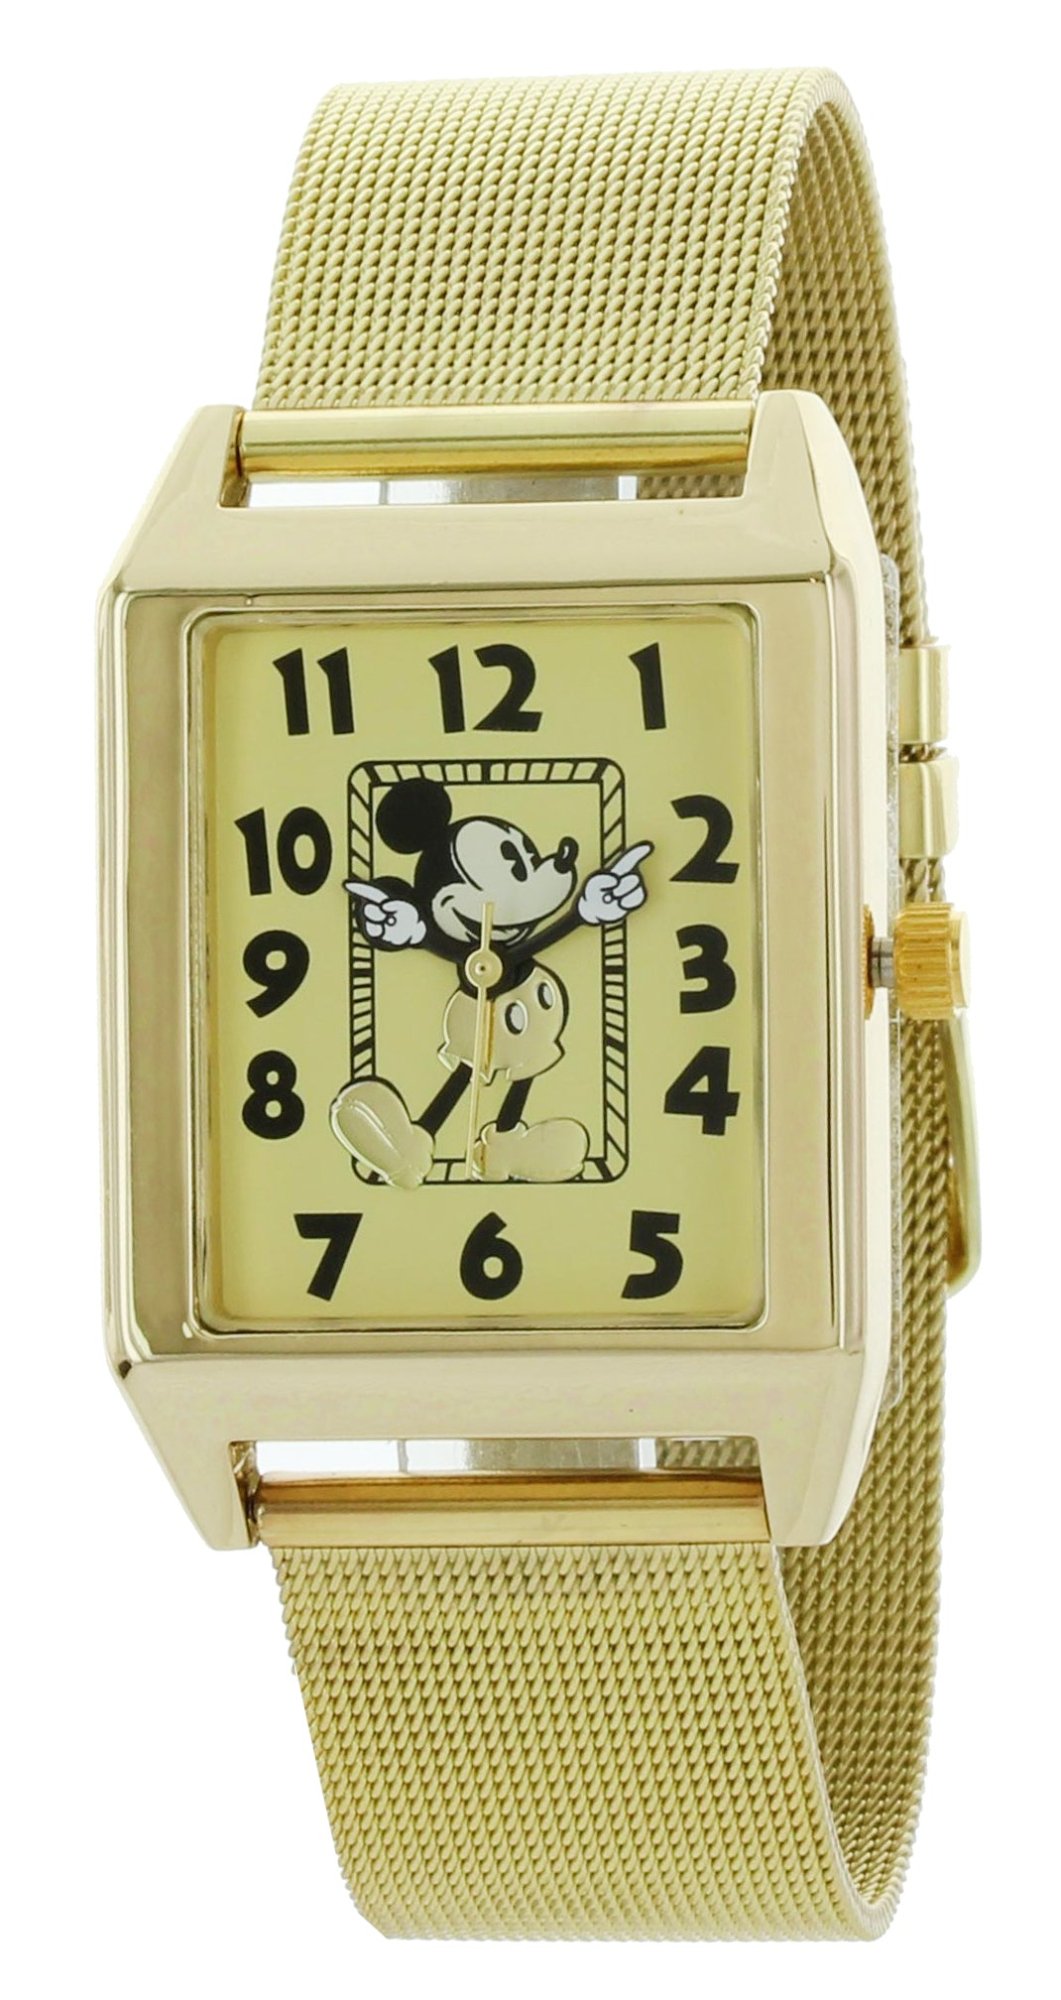 Model: Disney Rectangle Mickey Mouse Watch with Metal Mesh Band